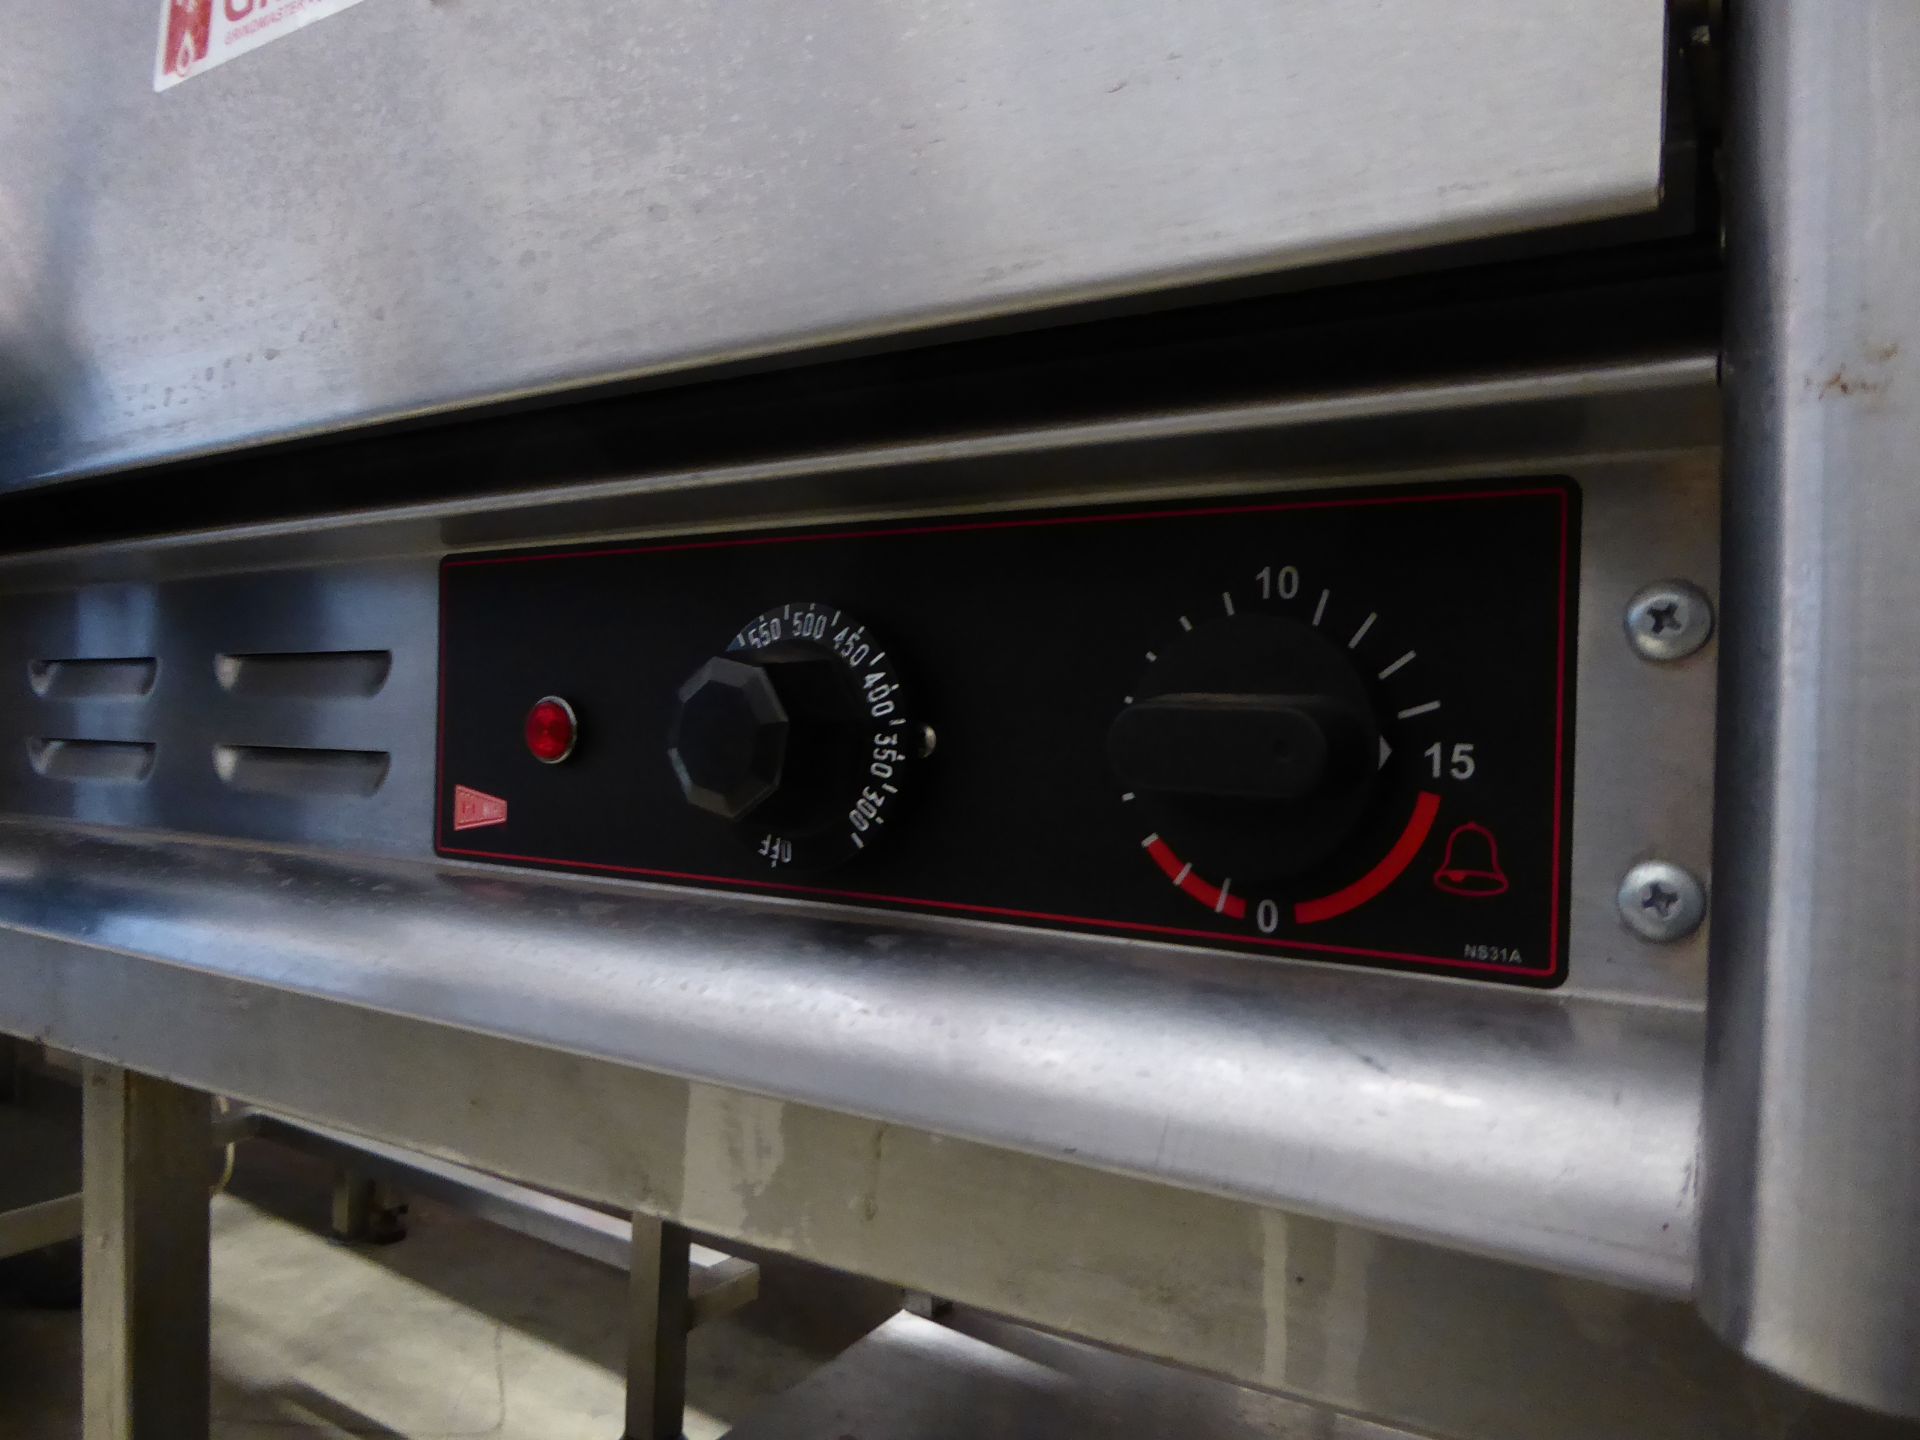 * grindmaster Cecilware 2 shelf pizza oven size 520 x 520 single phase electric - Image 3 of 3